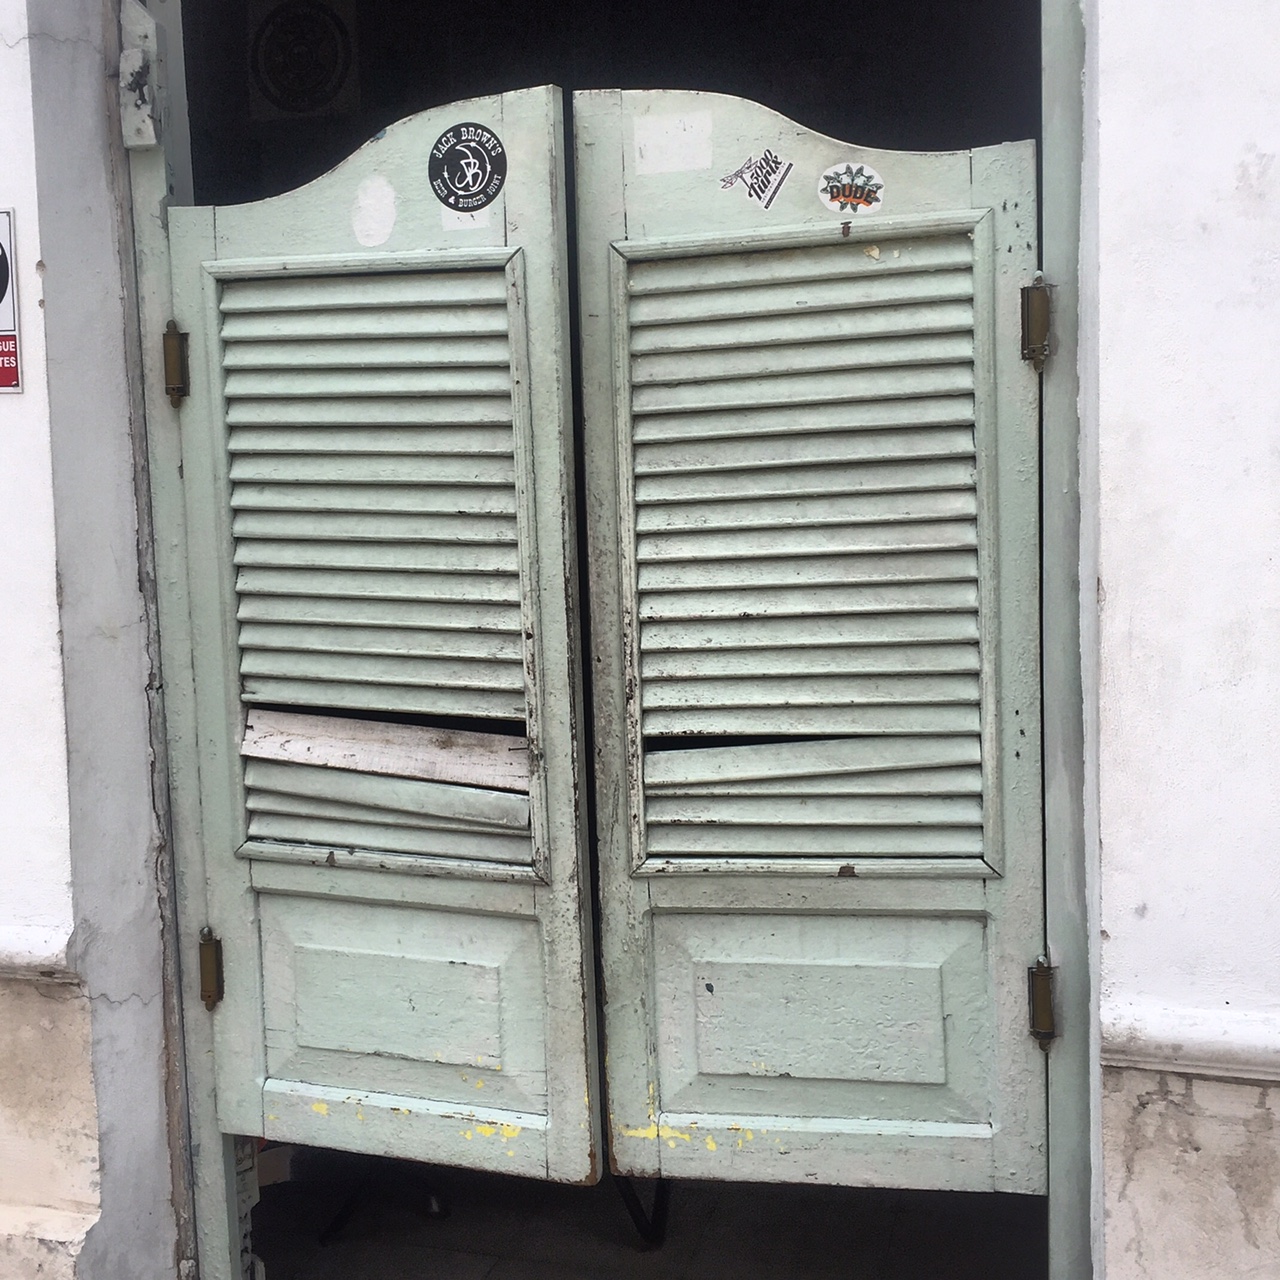 These battered doors have swung open for tequila-swilling masses for nearly 100 years. Merida, Mexico. La Negrita Cantina.